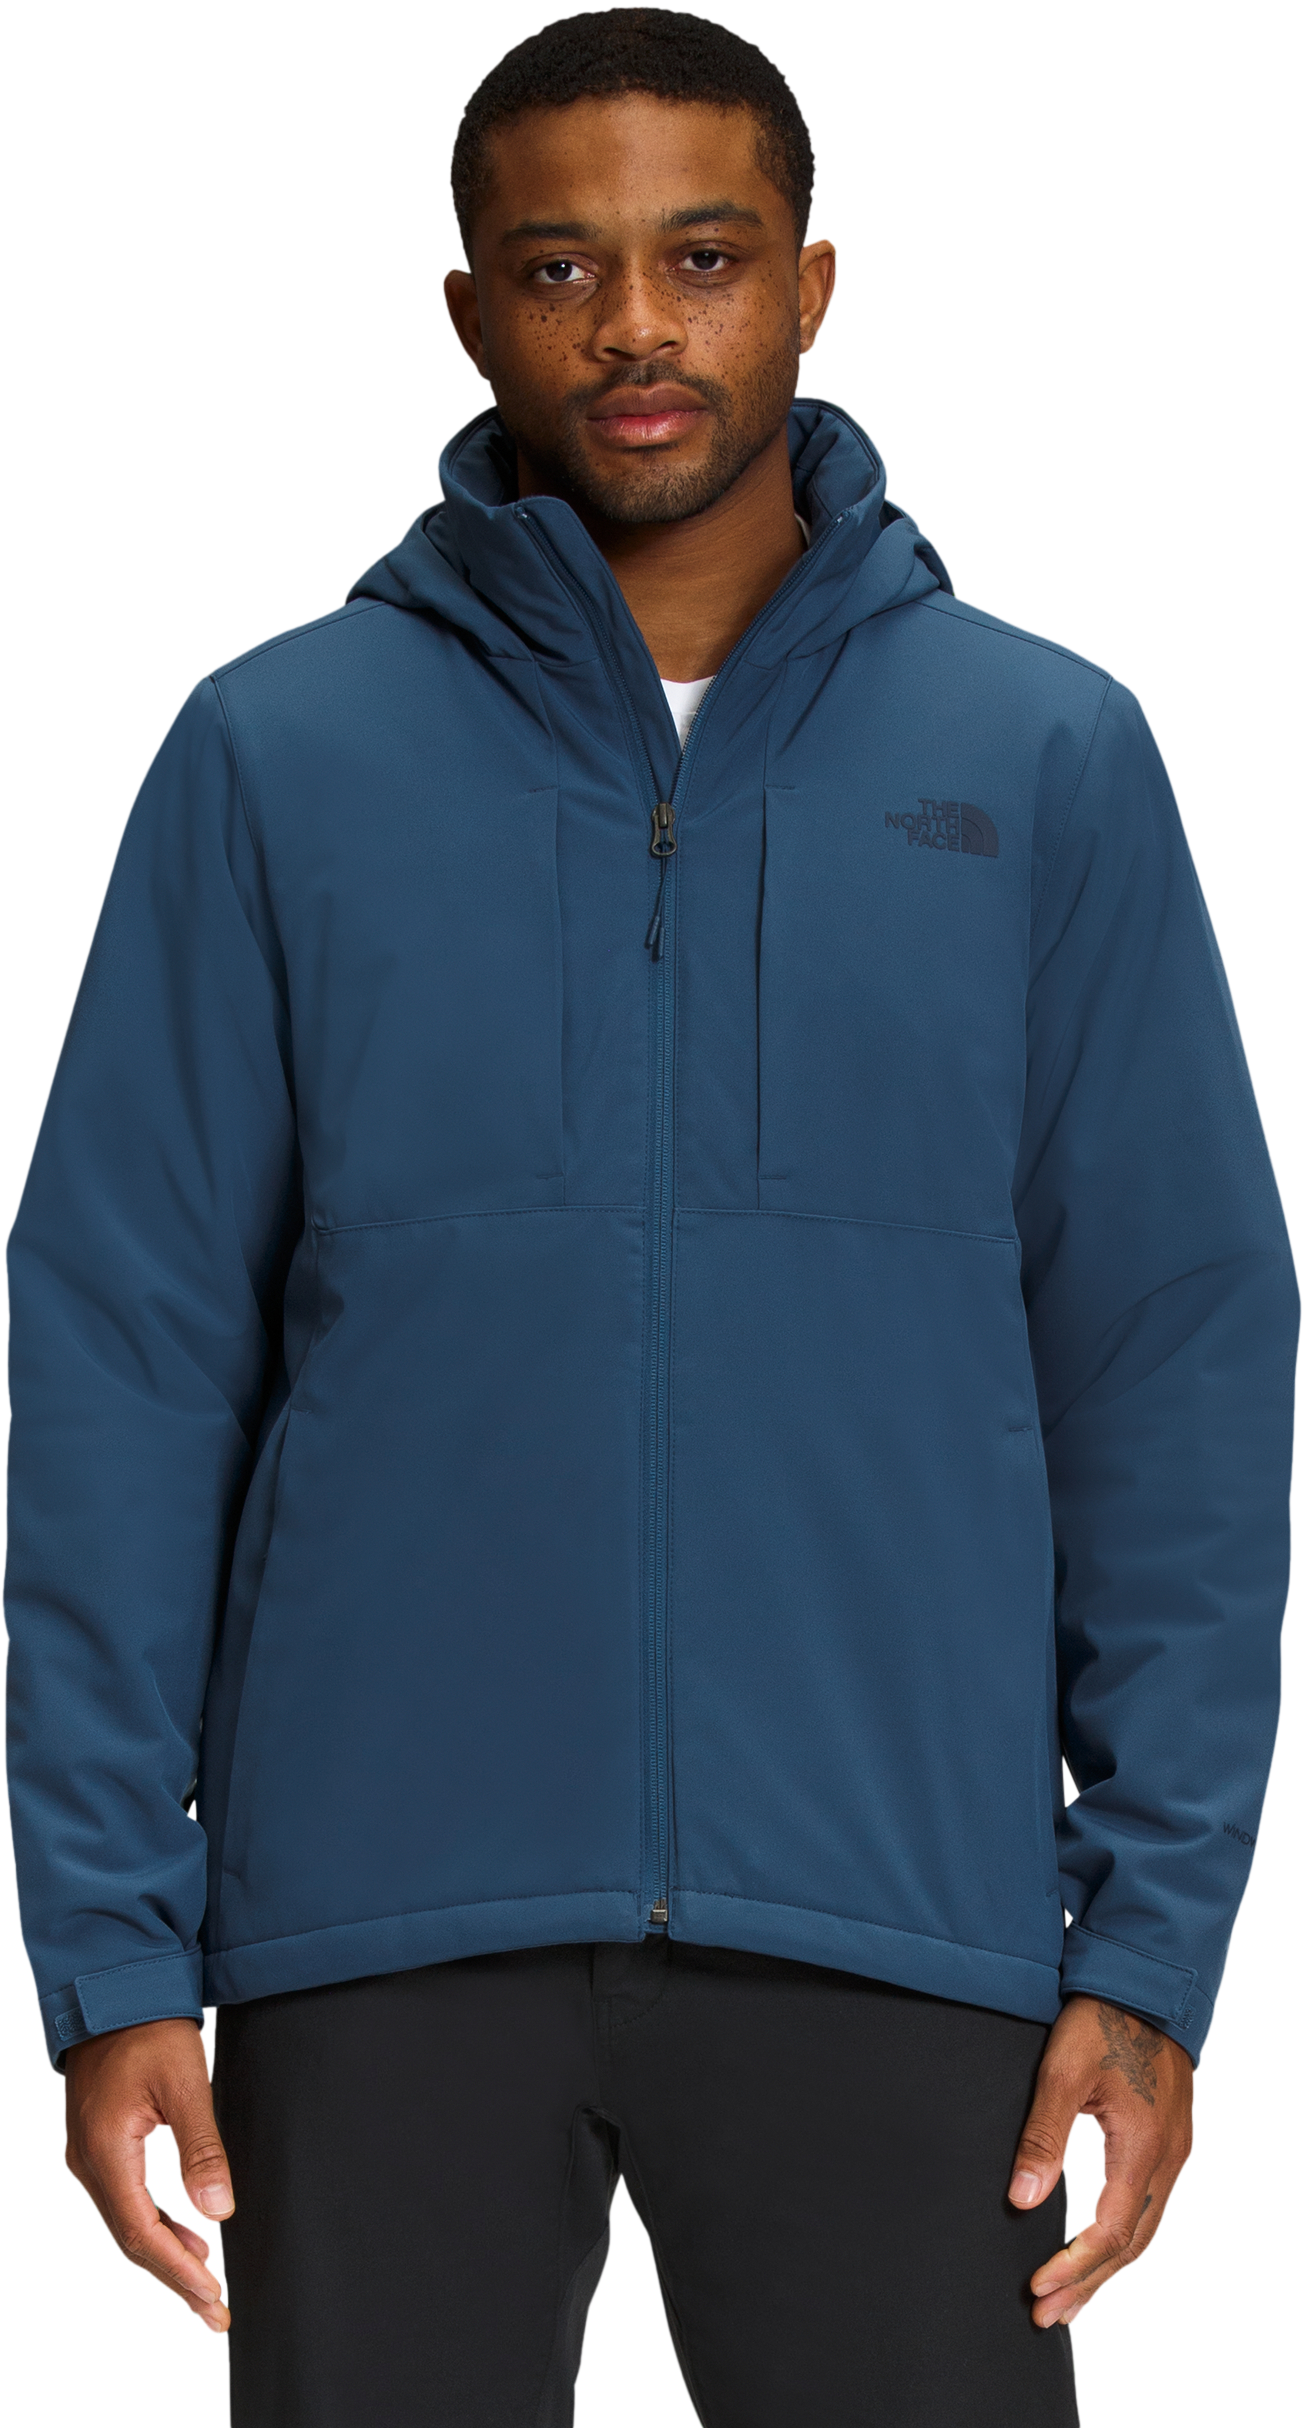 The North Face Apex Elevation Hooded Jacket for Men